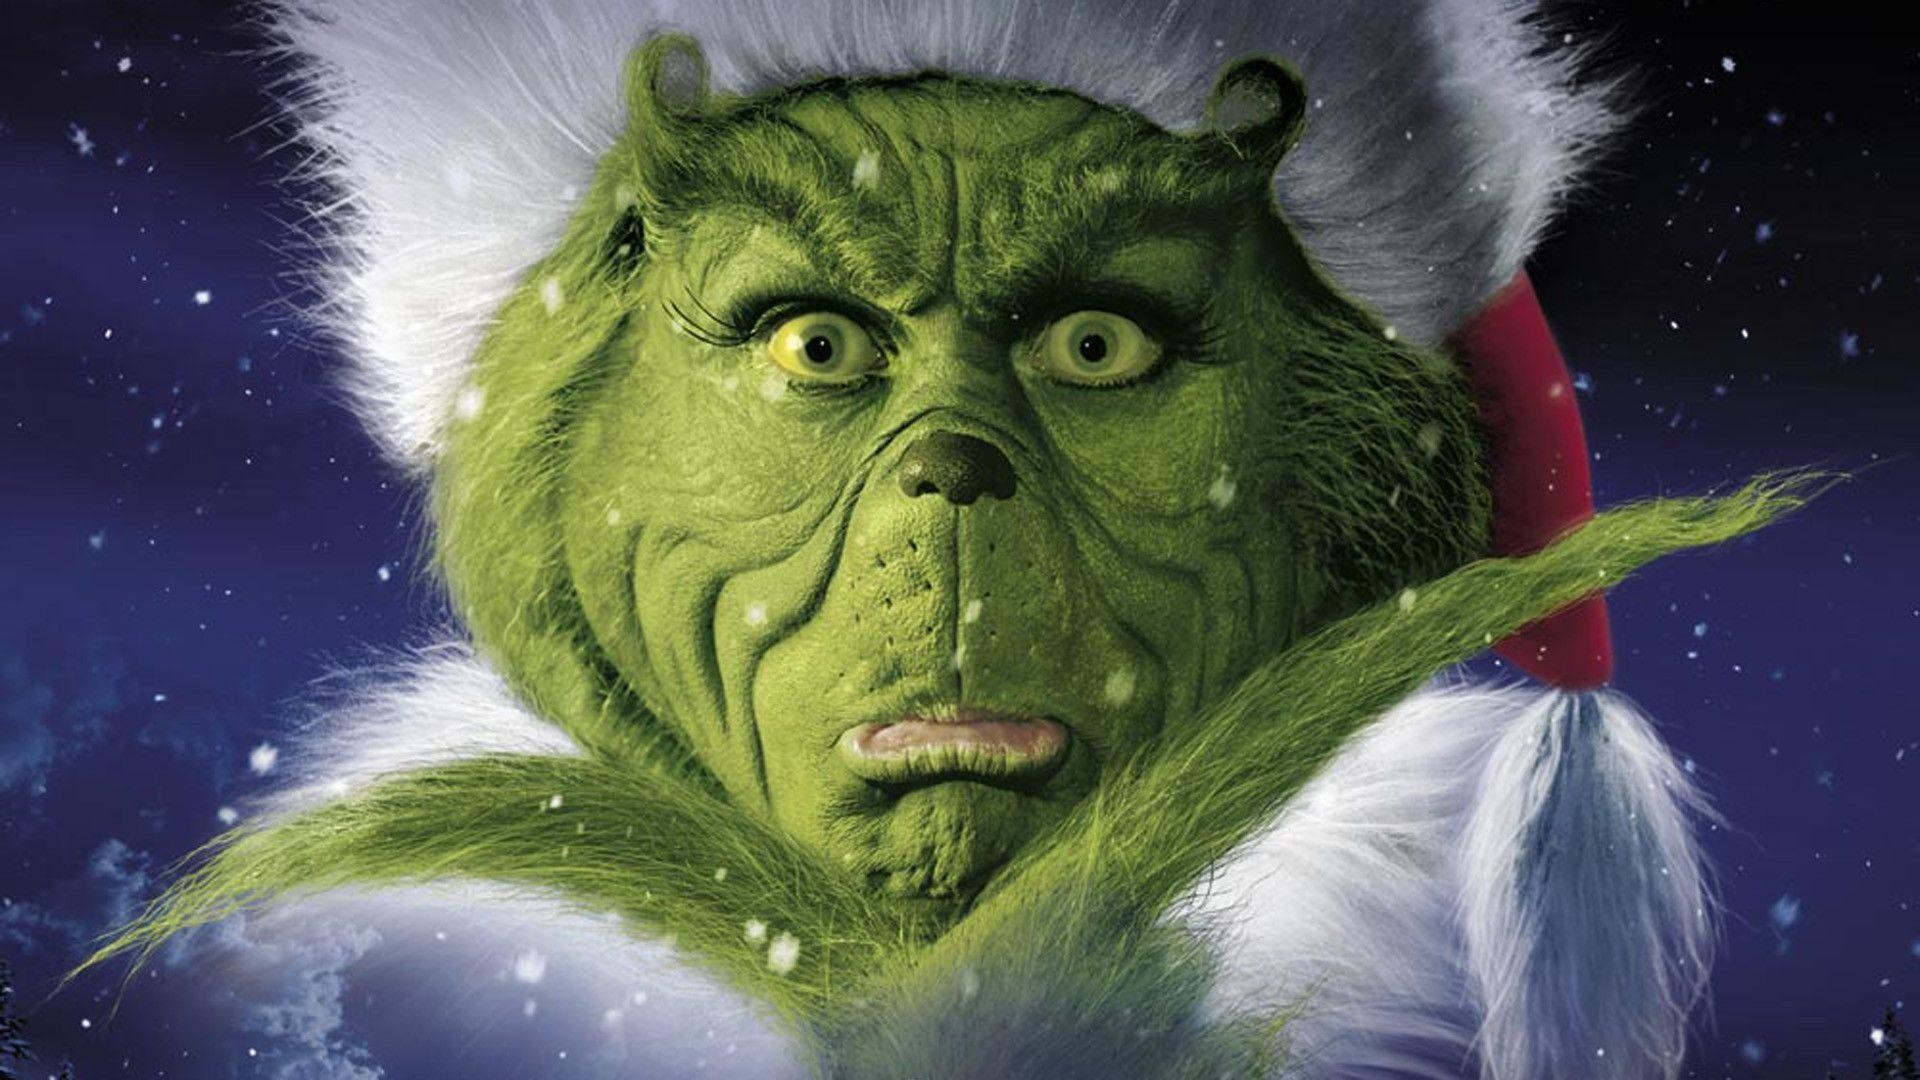 The Grinch How The Grinch Stole Christmas Wallpaper